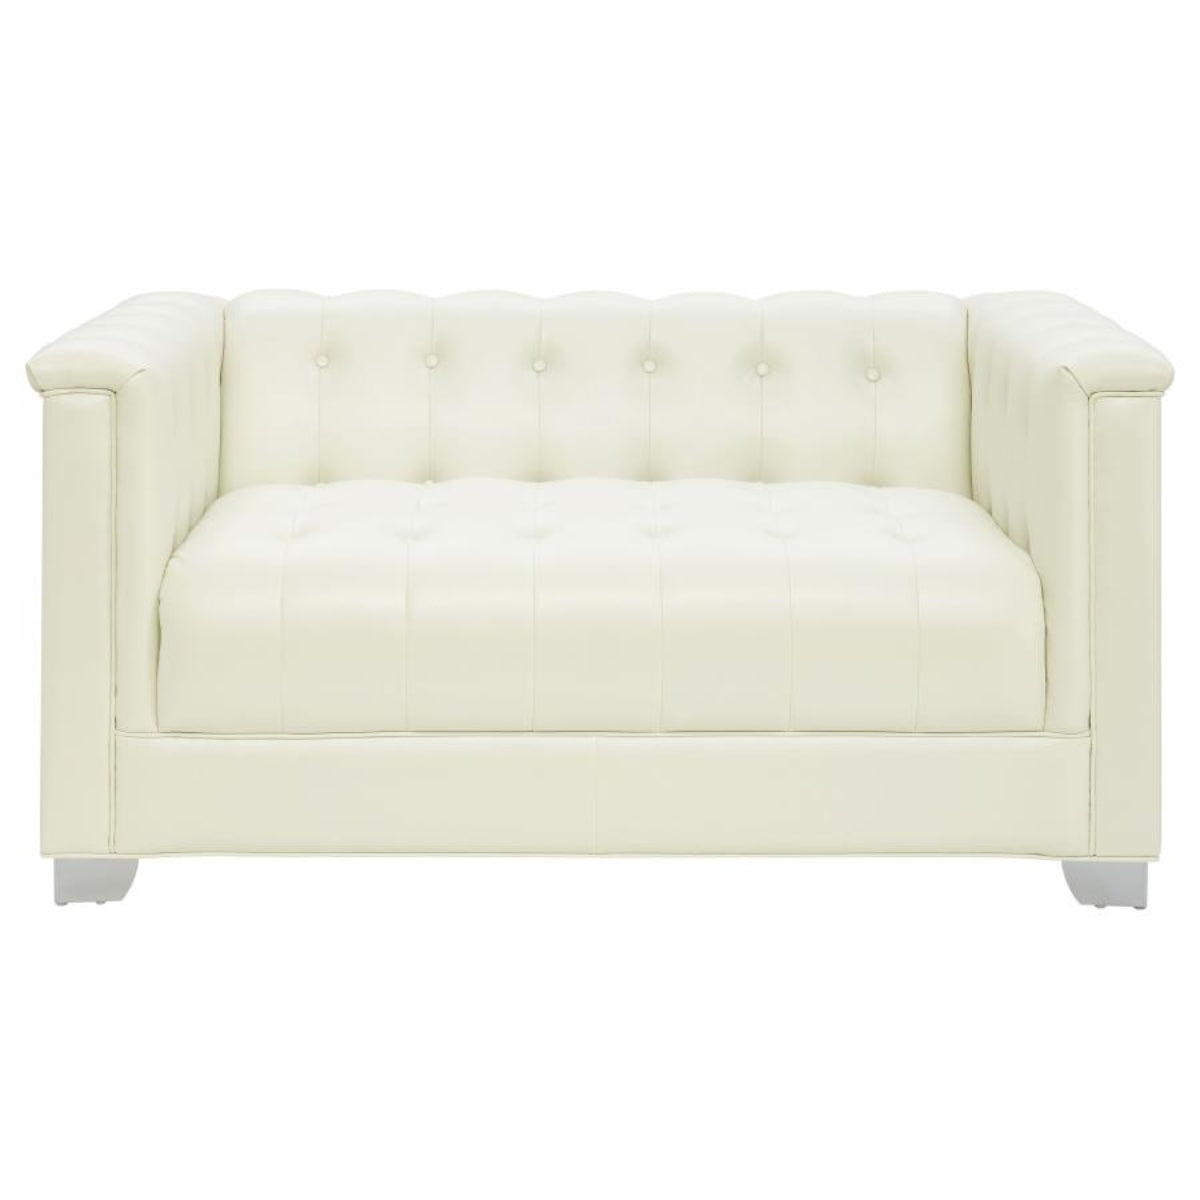 Tufted Sofa Set (2 pieces) Upholstered in Pearl White